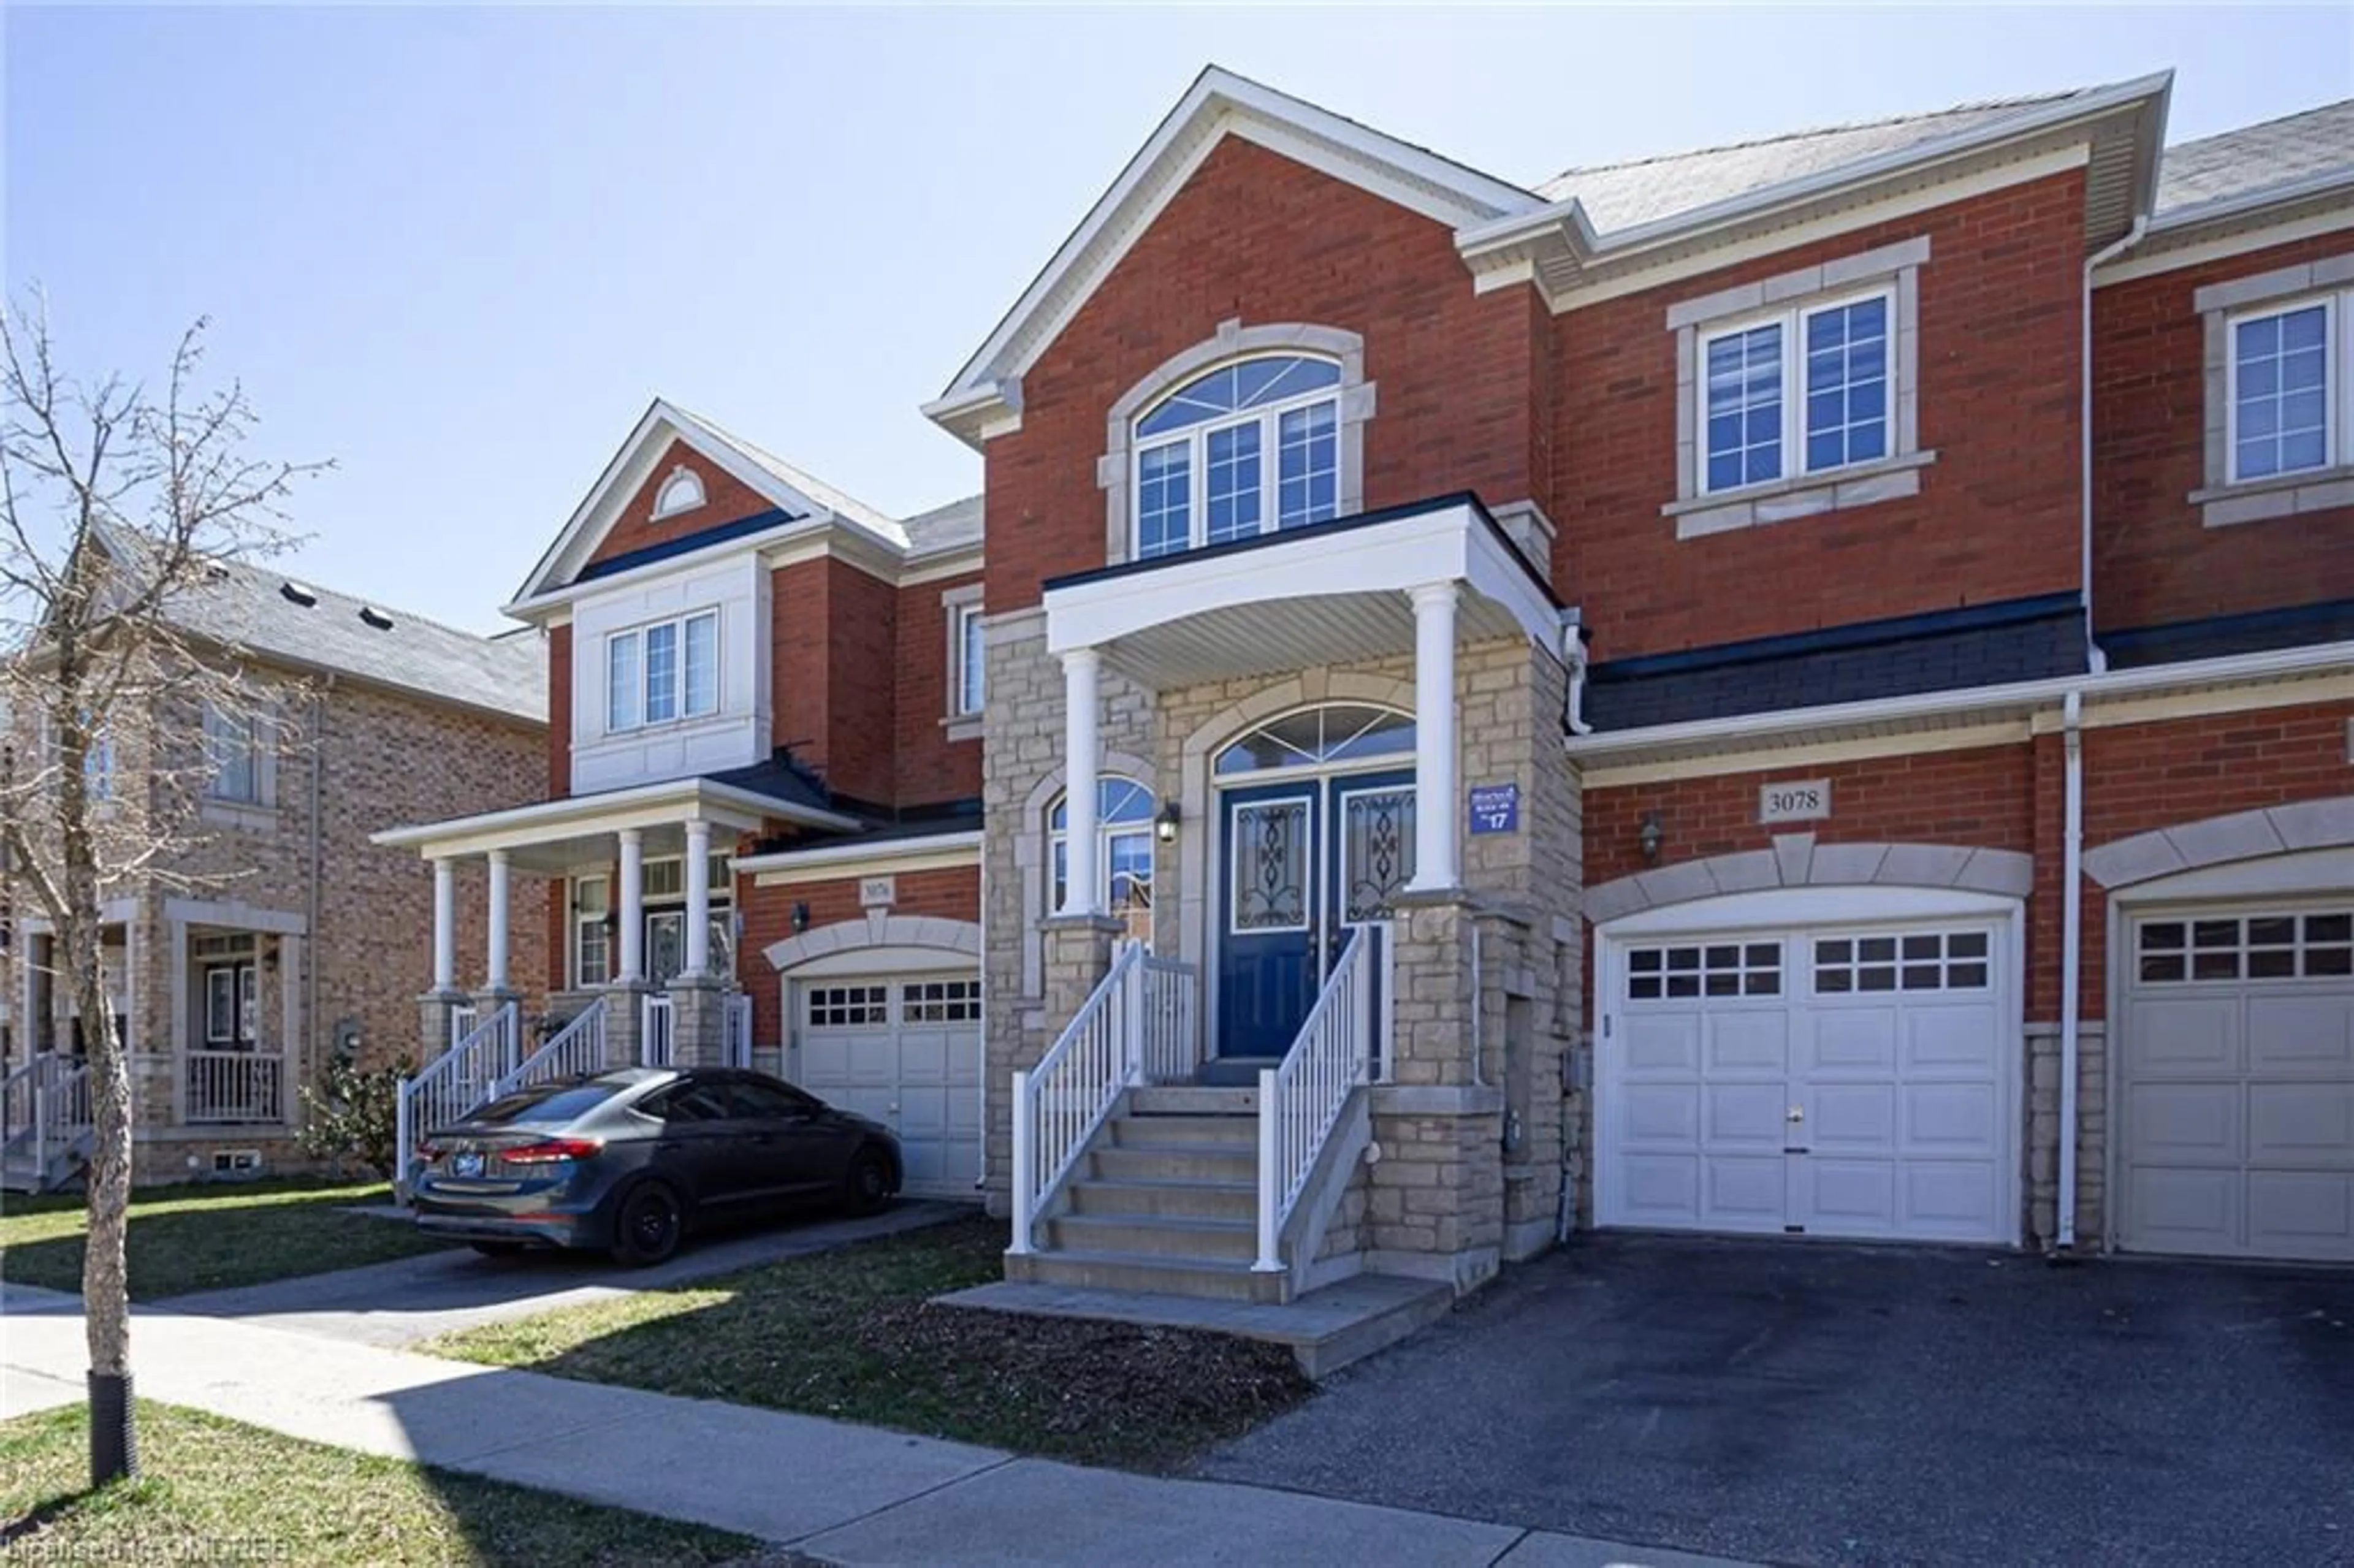 A pic from exterior of the house or condo for 3078 Janice Dr, Oakville Ontario L6M 0S7